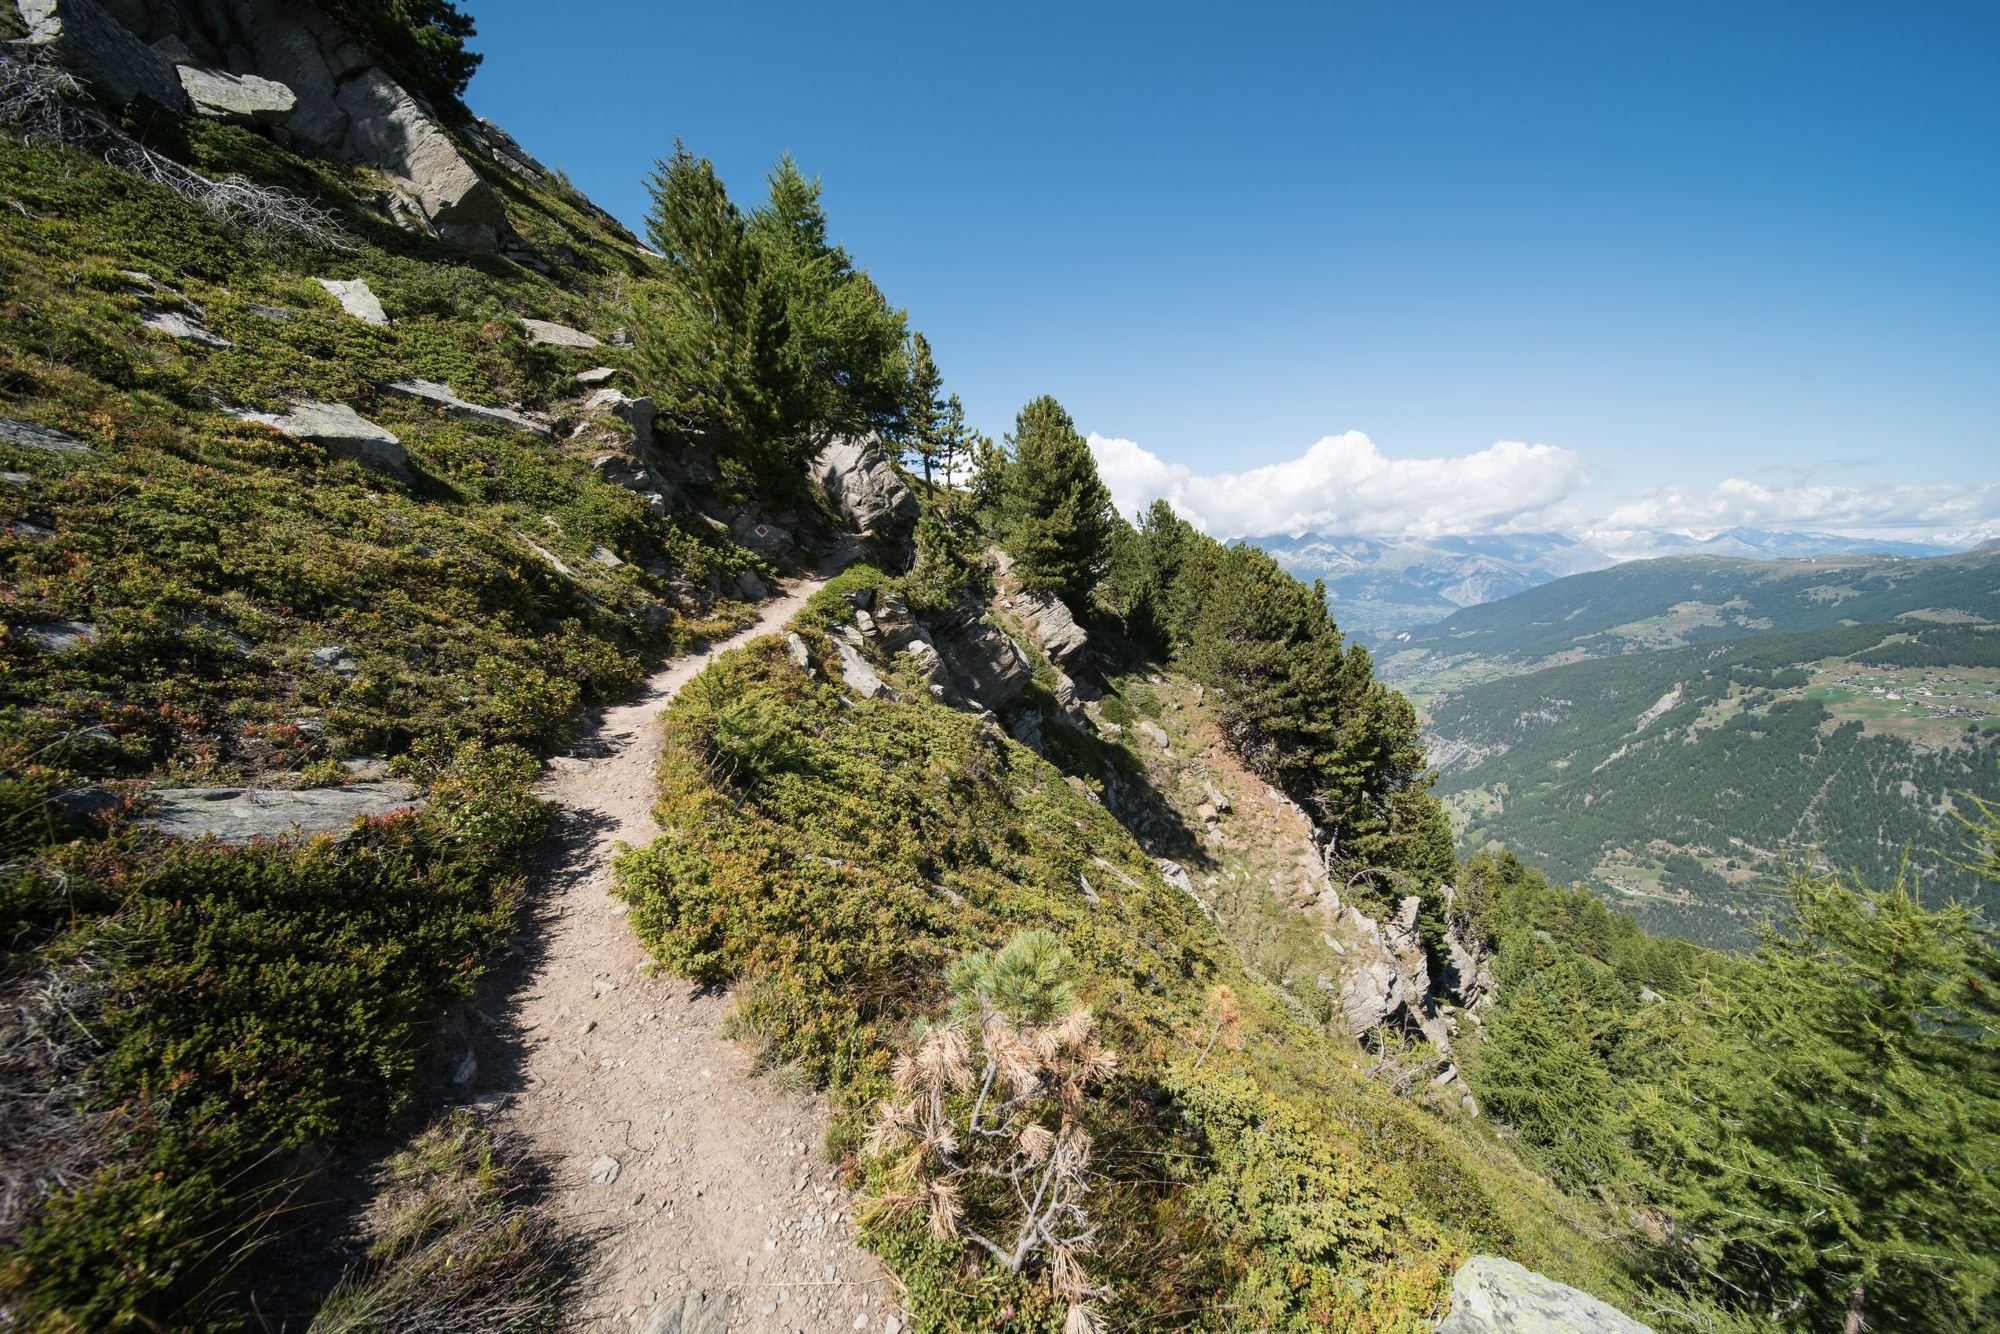 An example of the terrain and views on the high mountain trails above Grächen, in the Swiss Alps. Photo: Getty